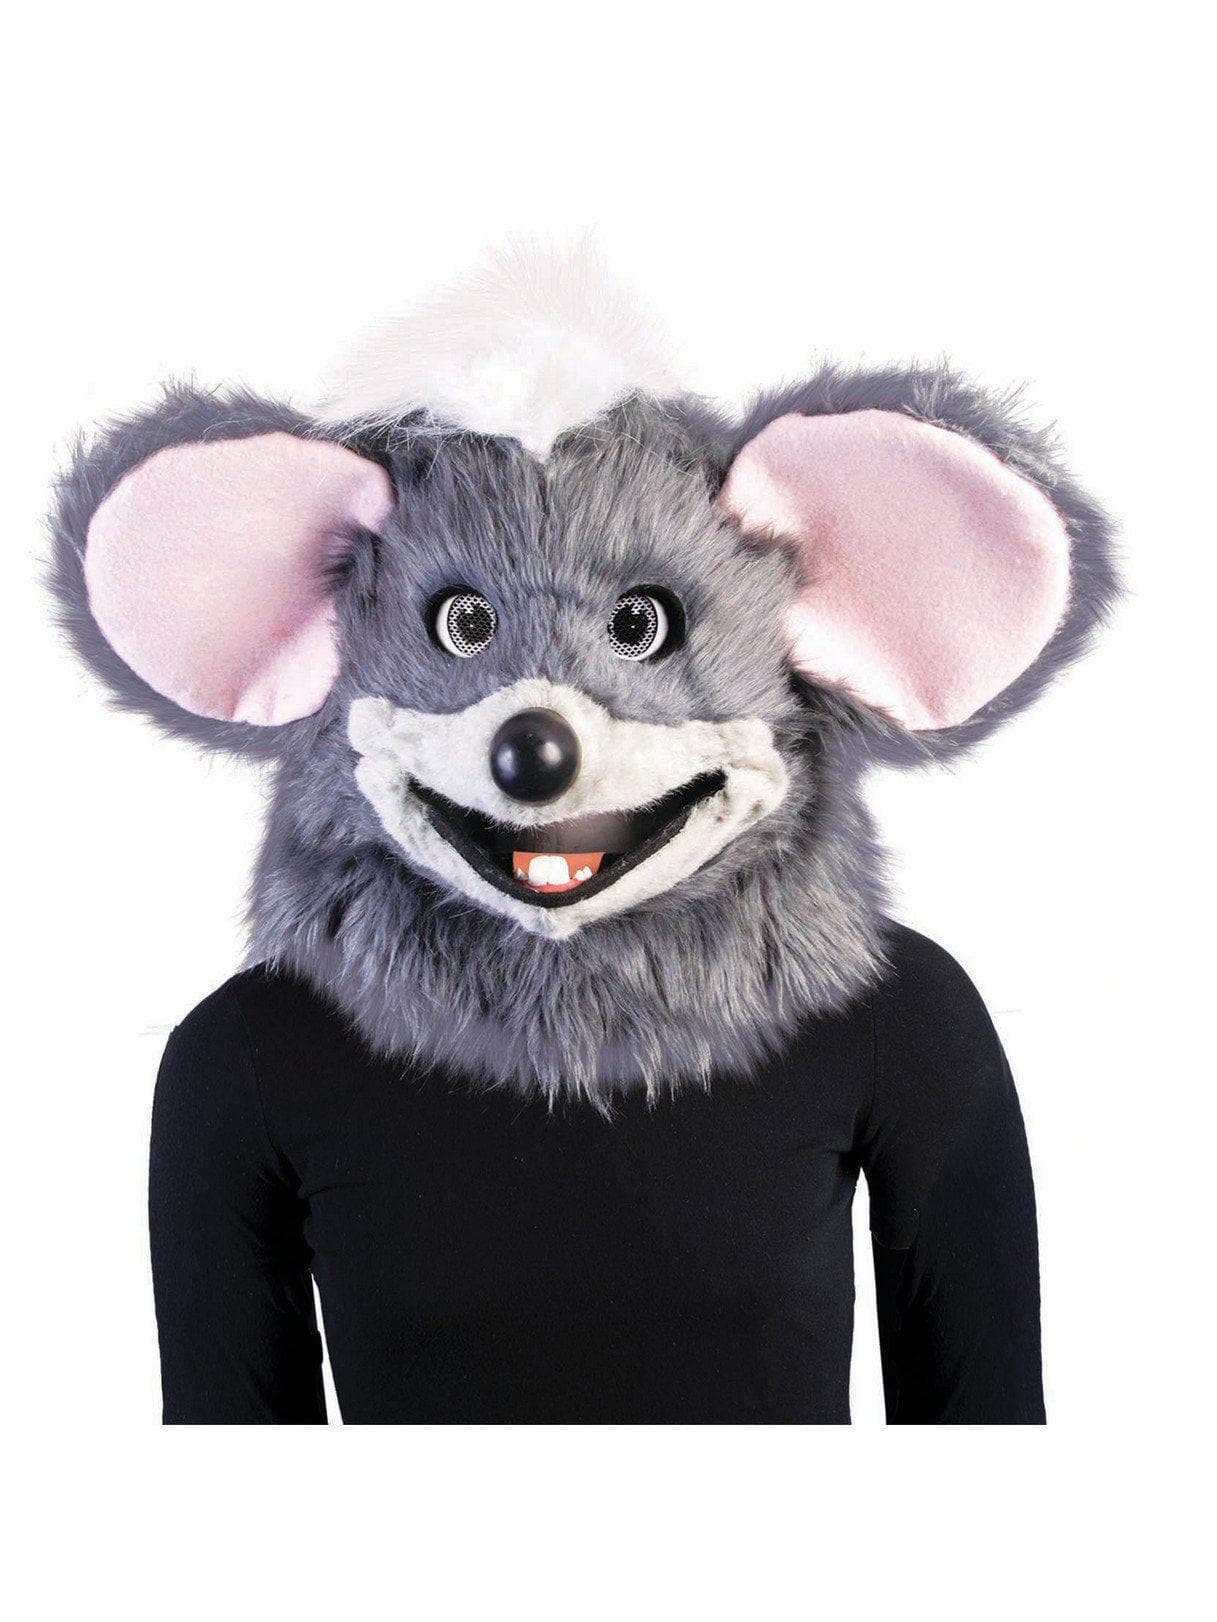 Moving Jaw Mouse - costumes.com